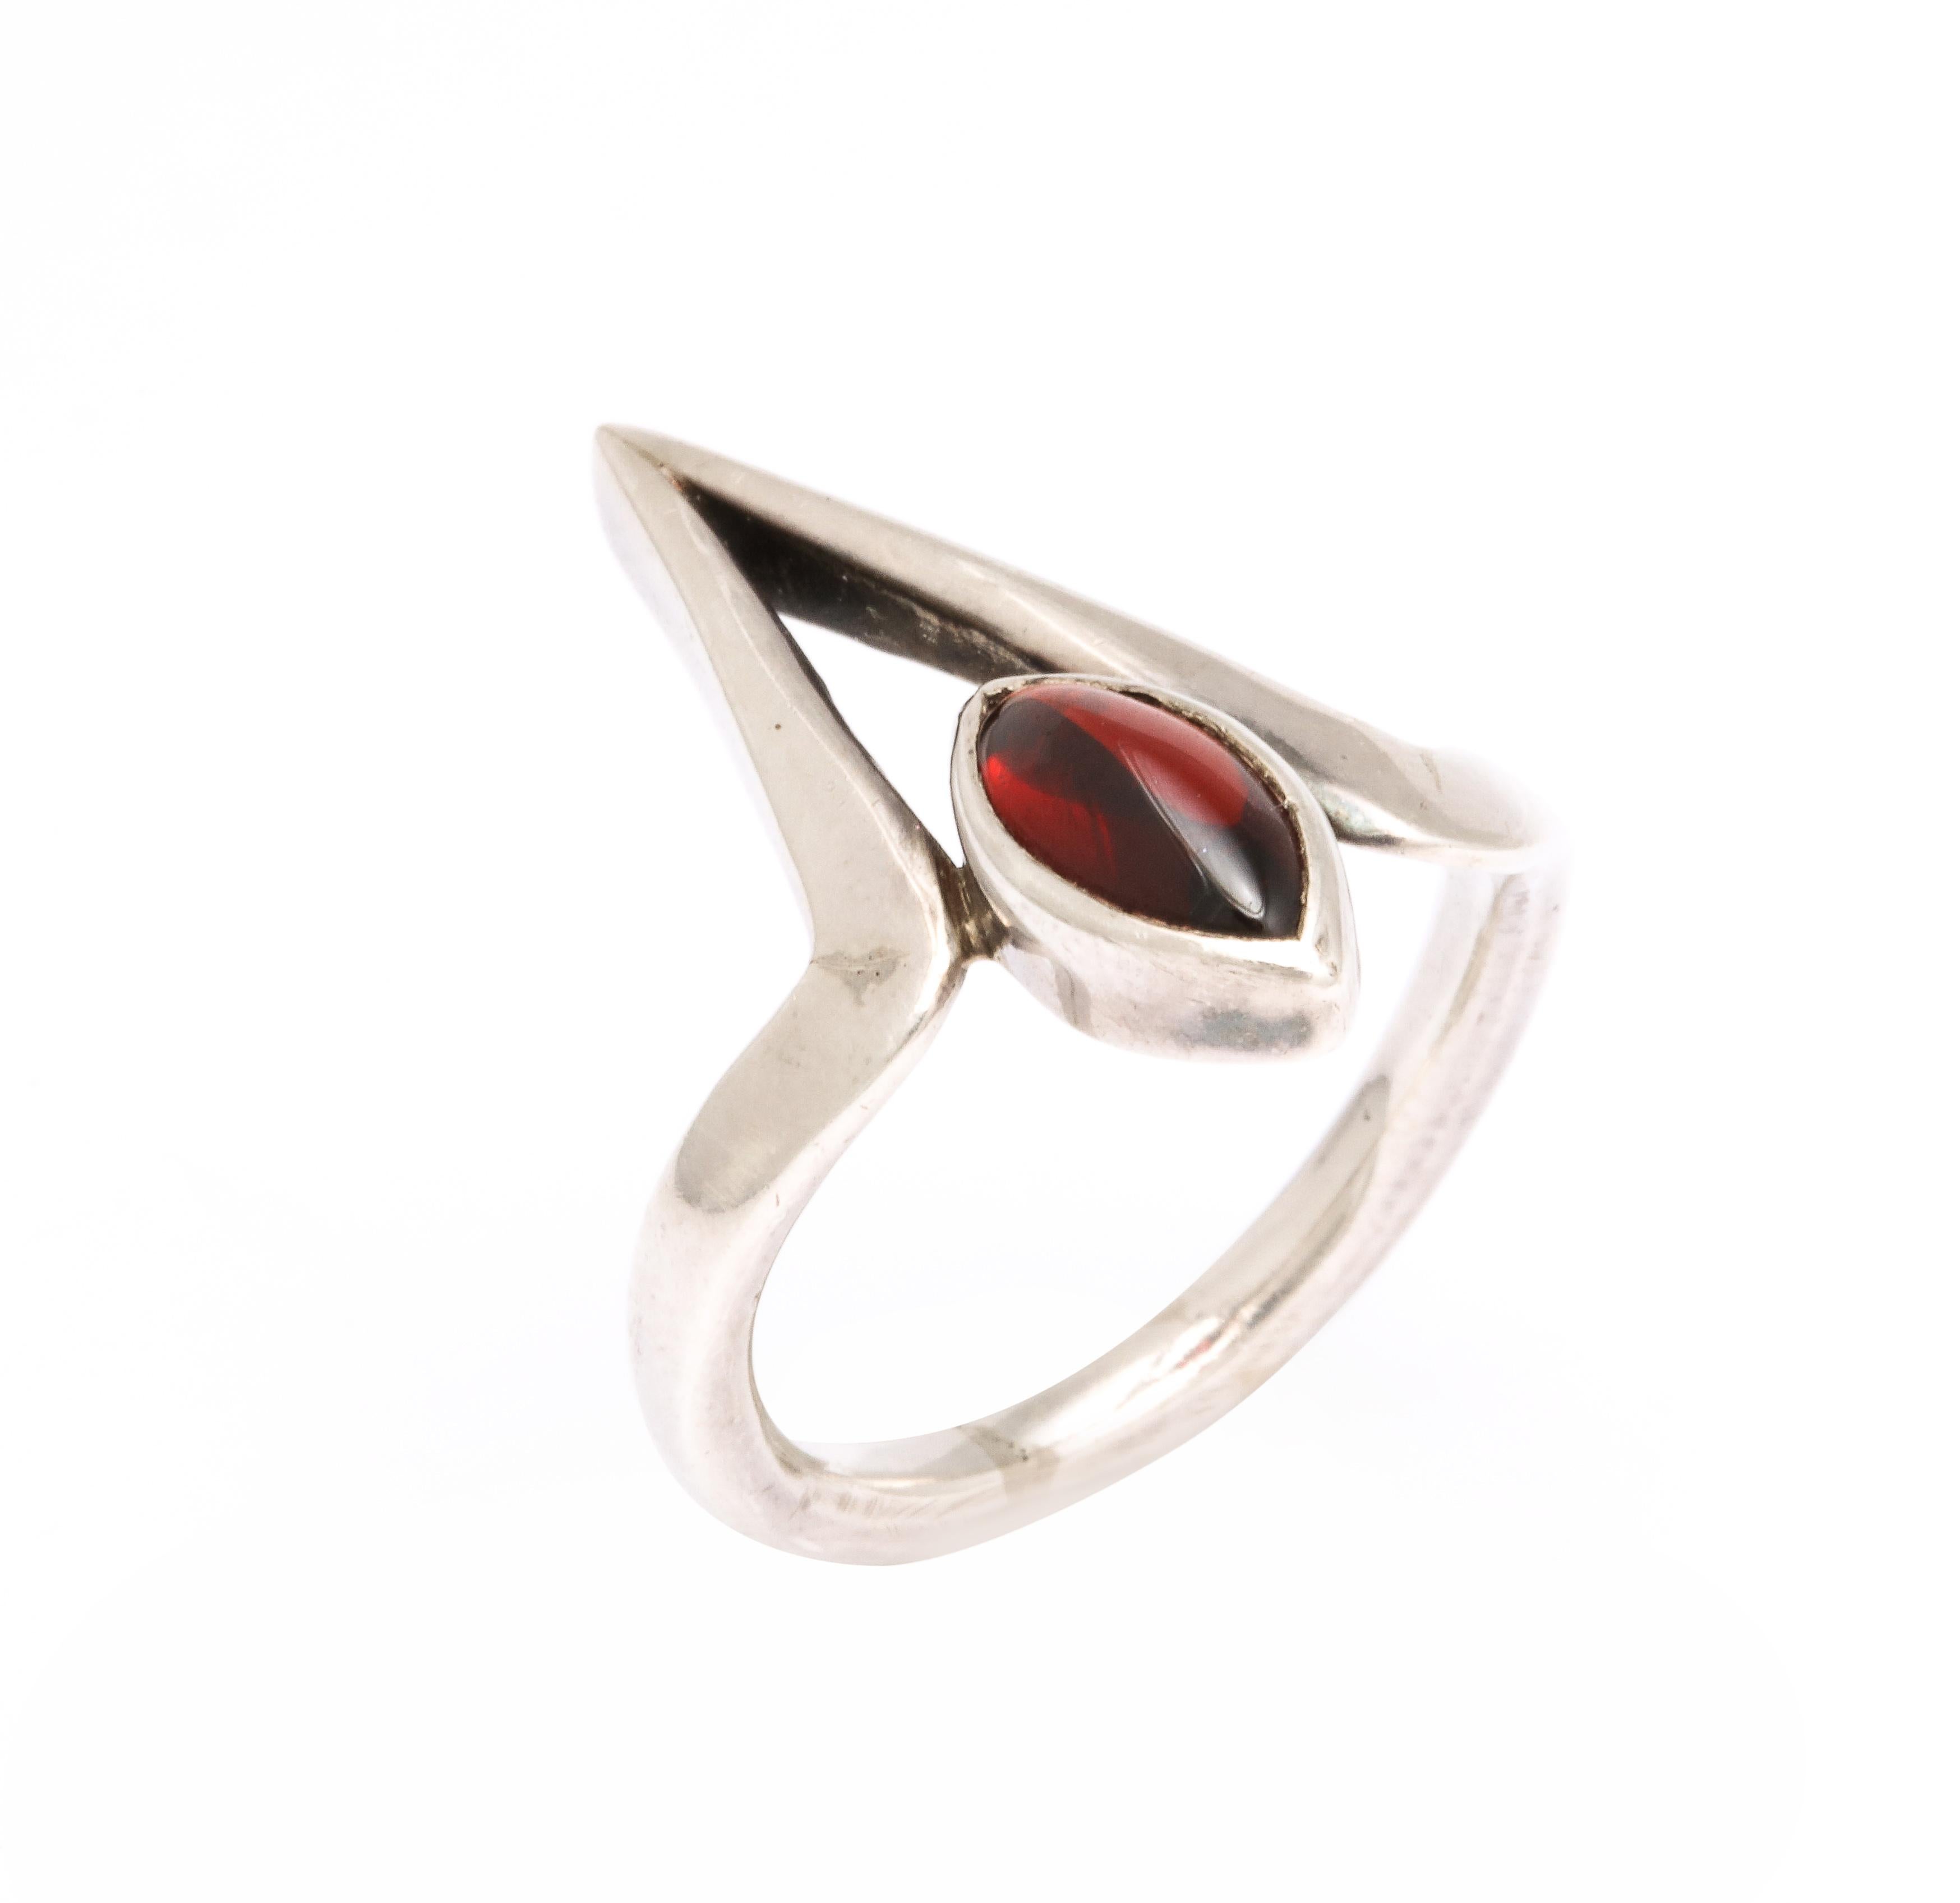 We offer a striking asymmetric ring design in silver and garnet made by Jack Nutting, a modernist sculptor and jewelry designer. The oval garnet, deeply set in a substantial silver collet, rests with grace in a triangular pagoda. The ring is one